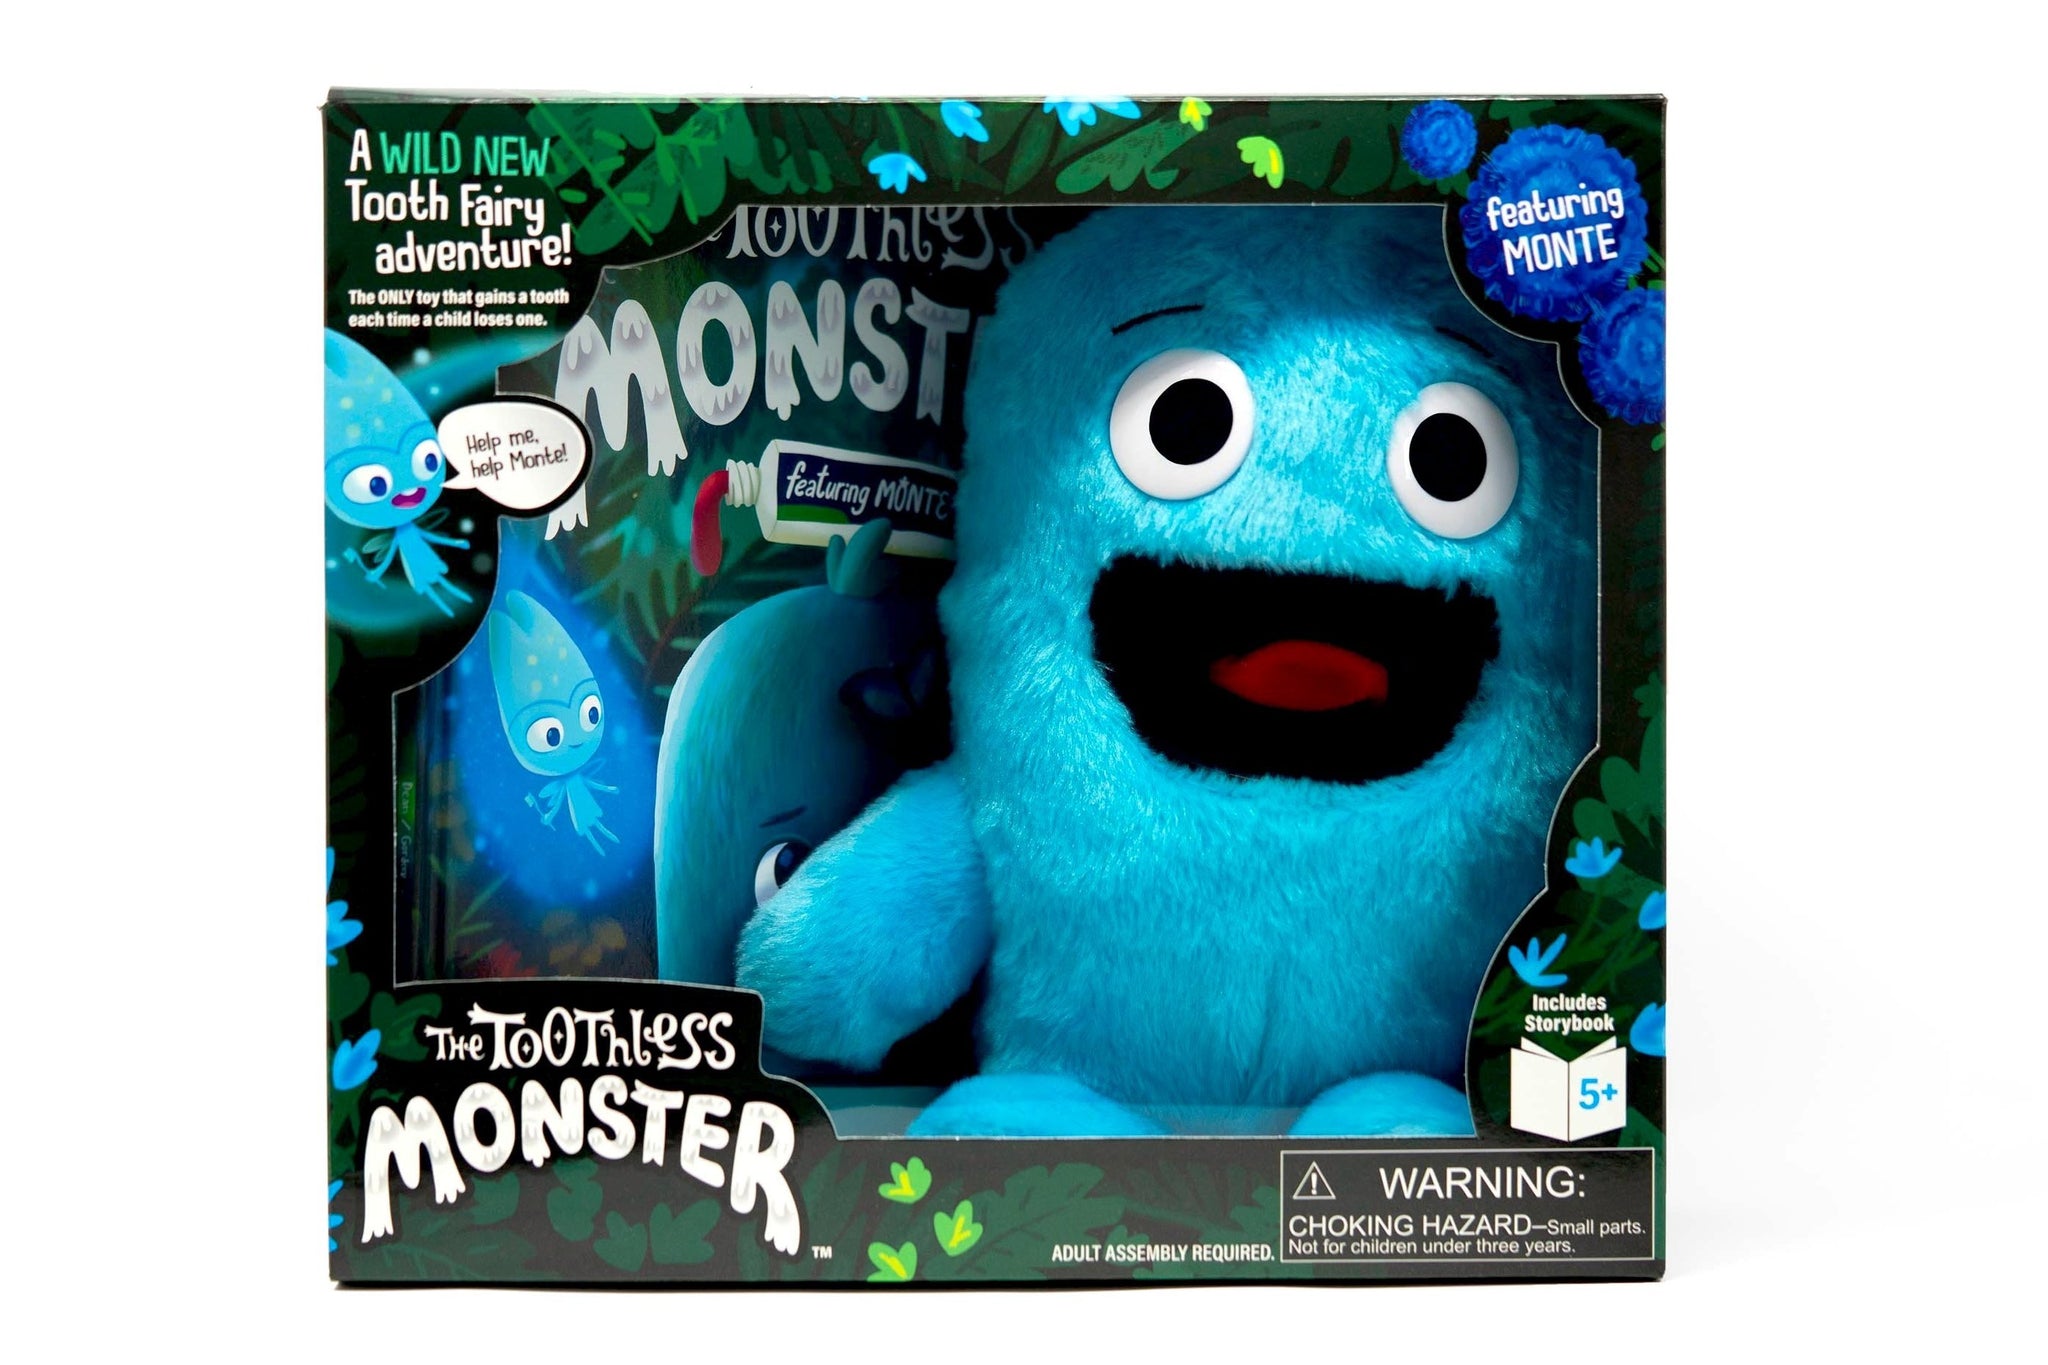 The Toothless Monster boxed set with book and blue Monte doll. A wild tooth fairy tradition.